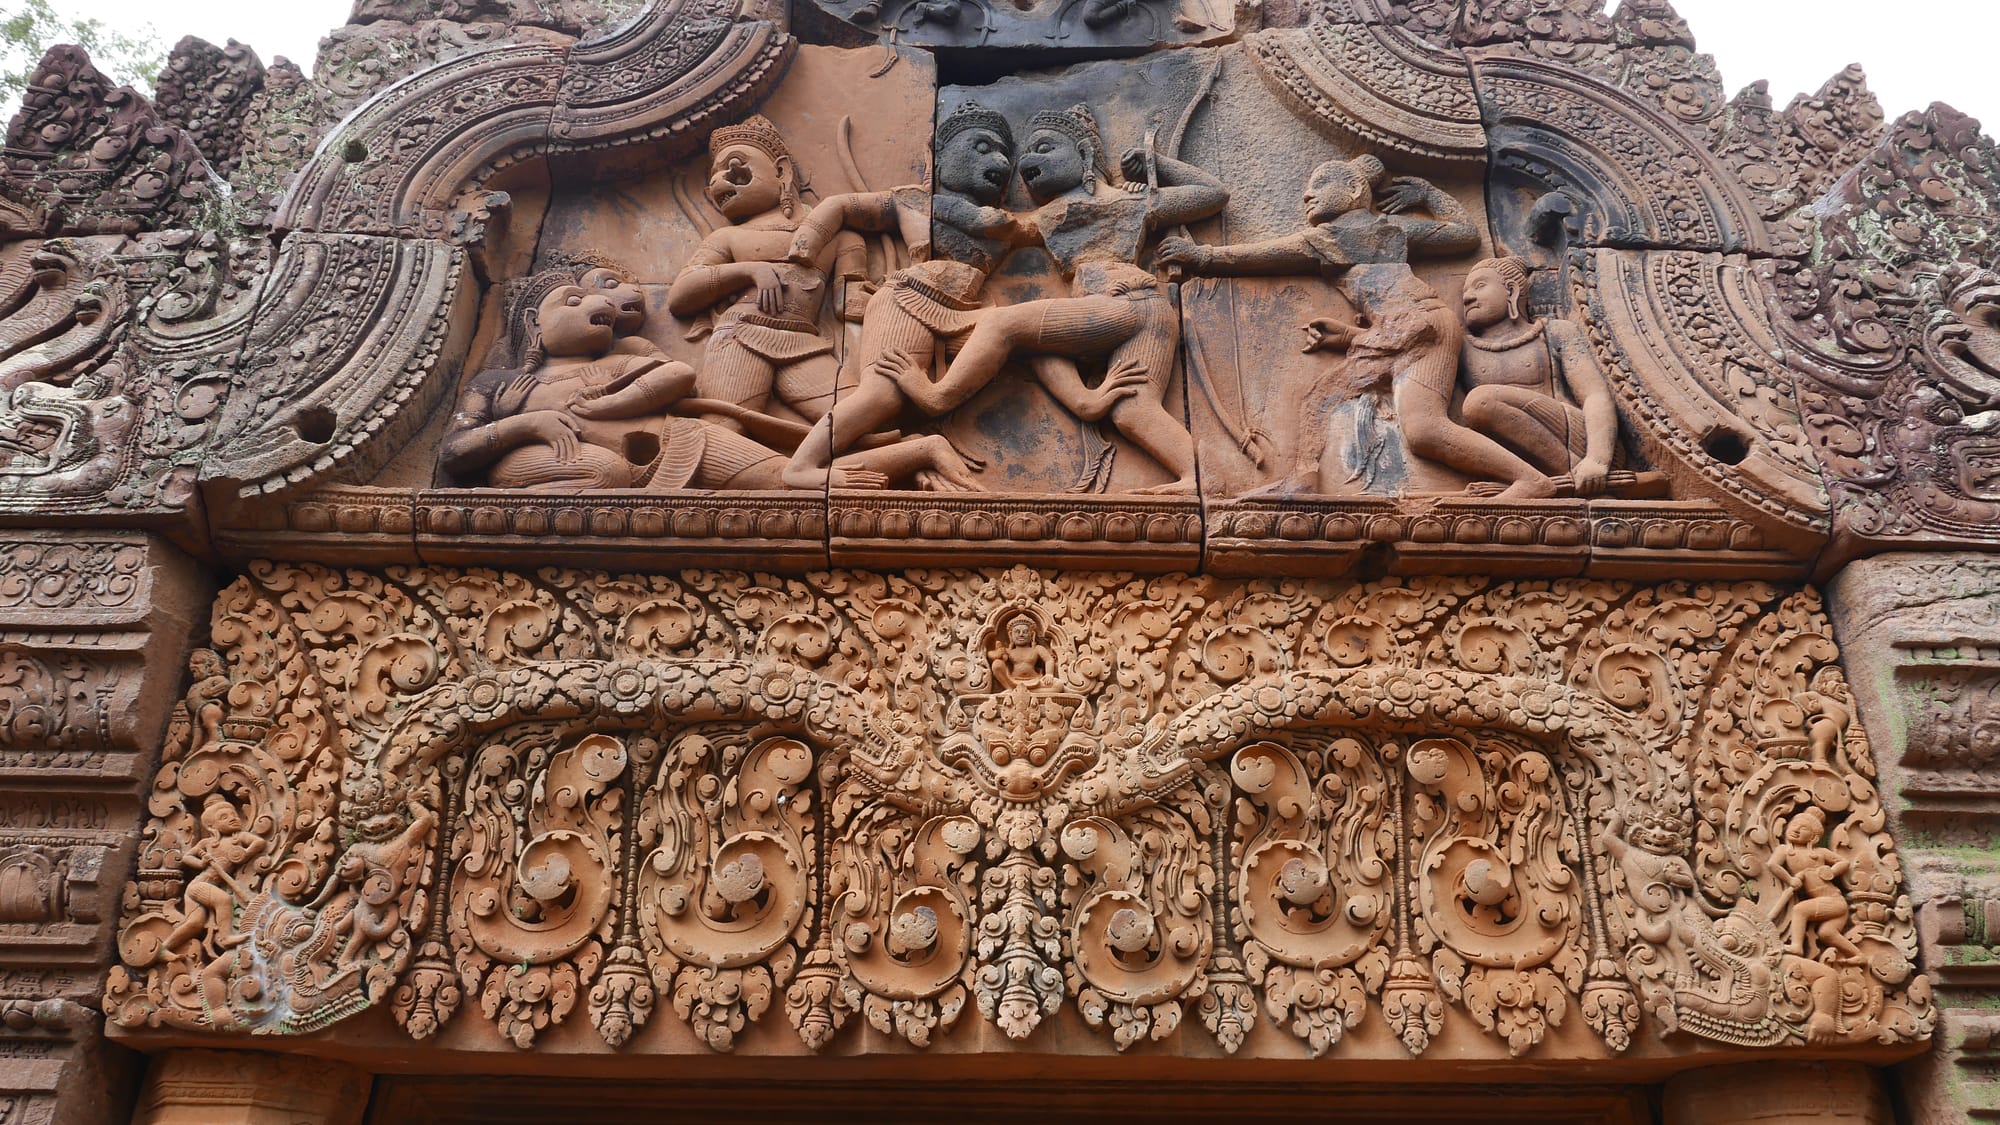 Photo by Author — combat between Vāli and Sugrīva — Banteay Srei Temple (ប្រាសាទបន្ទាយស្រី), Angkor Archaeological Park, Angkor, Cambodia